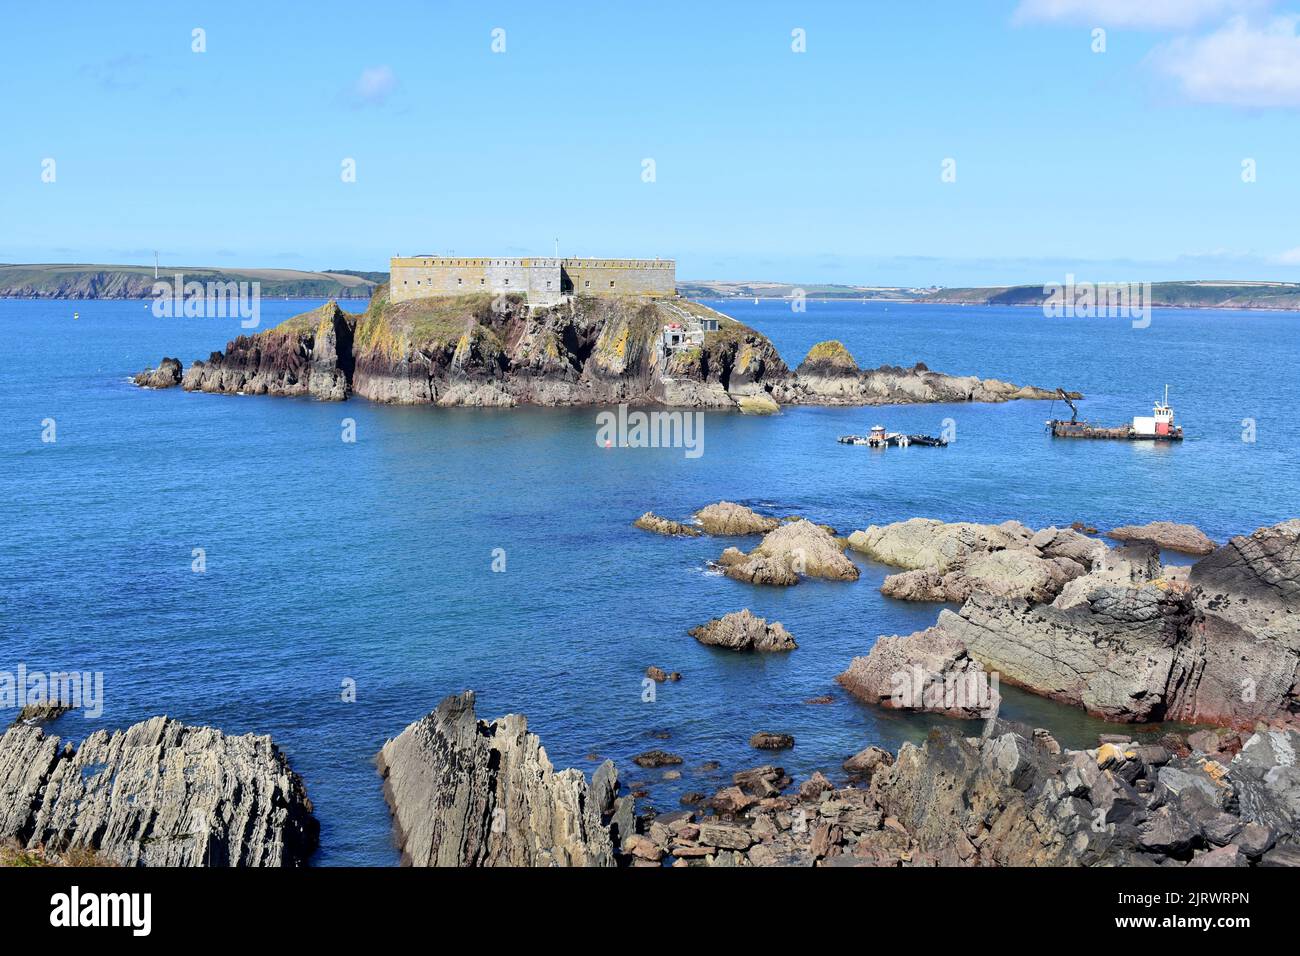 Thorne island and view across Milford Haven waterway, Angle, Pembrokeshire, Wales Stock Photo